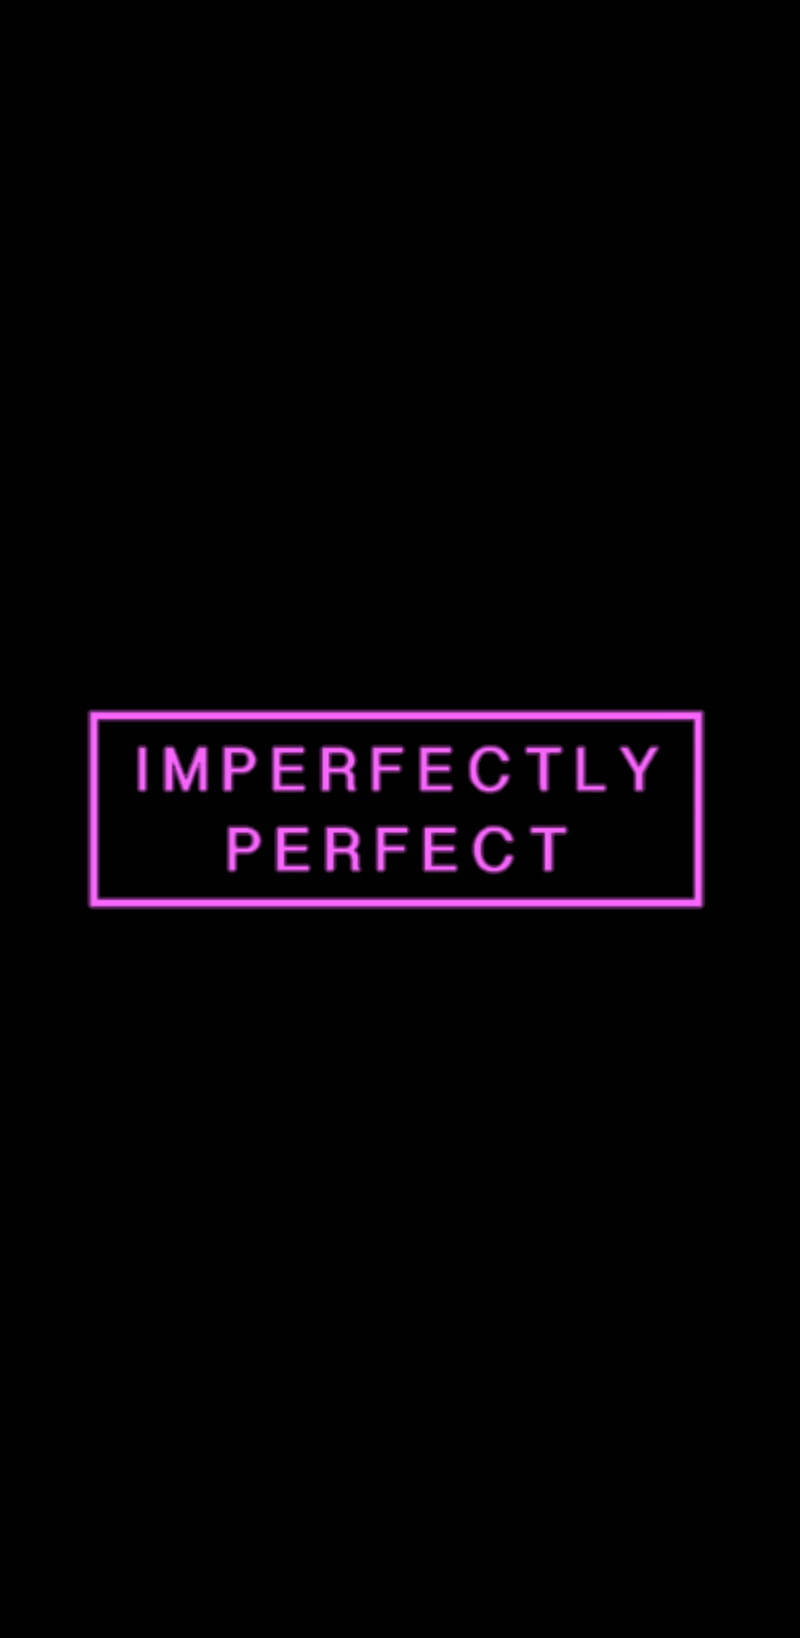 Dark Theme Pink Neon Imperfectly Perfect